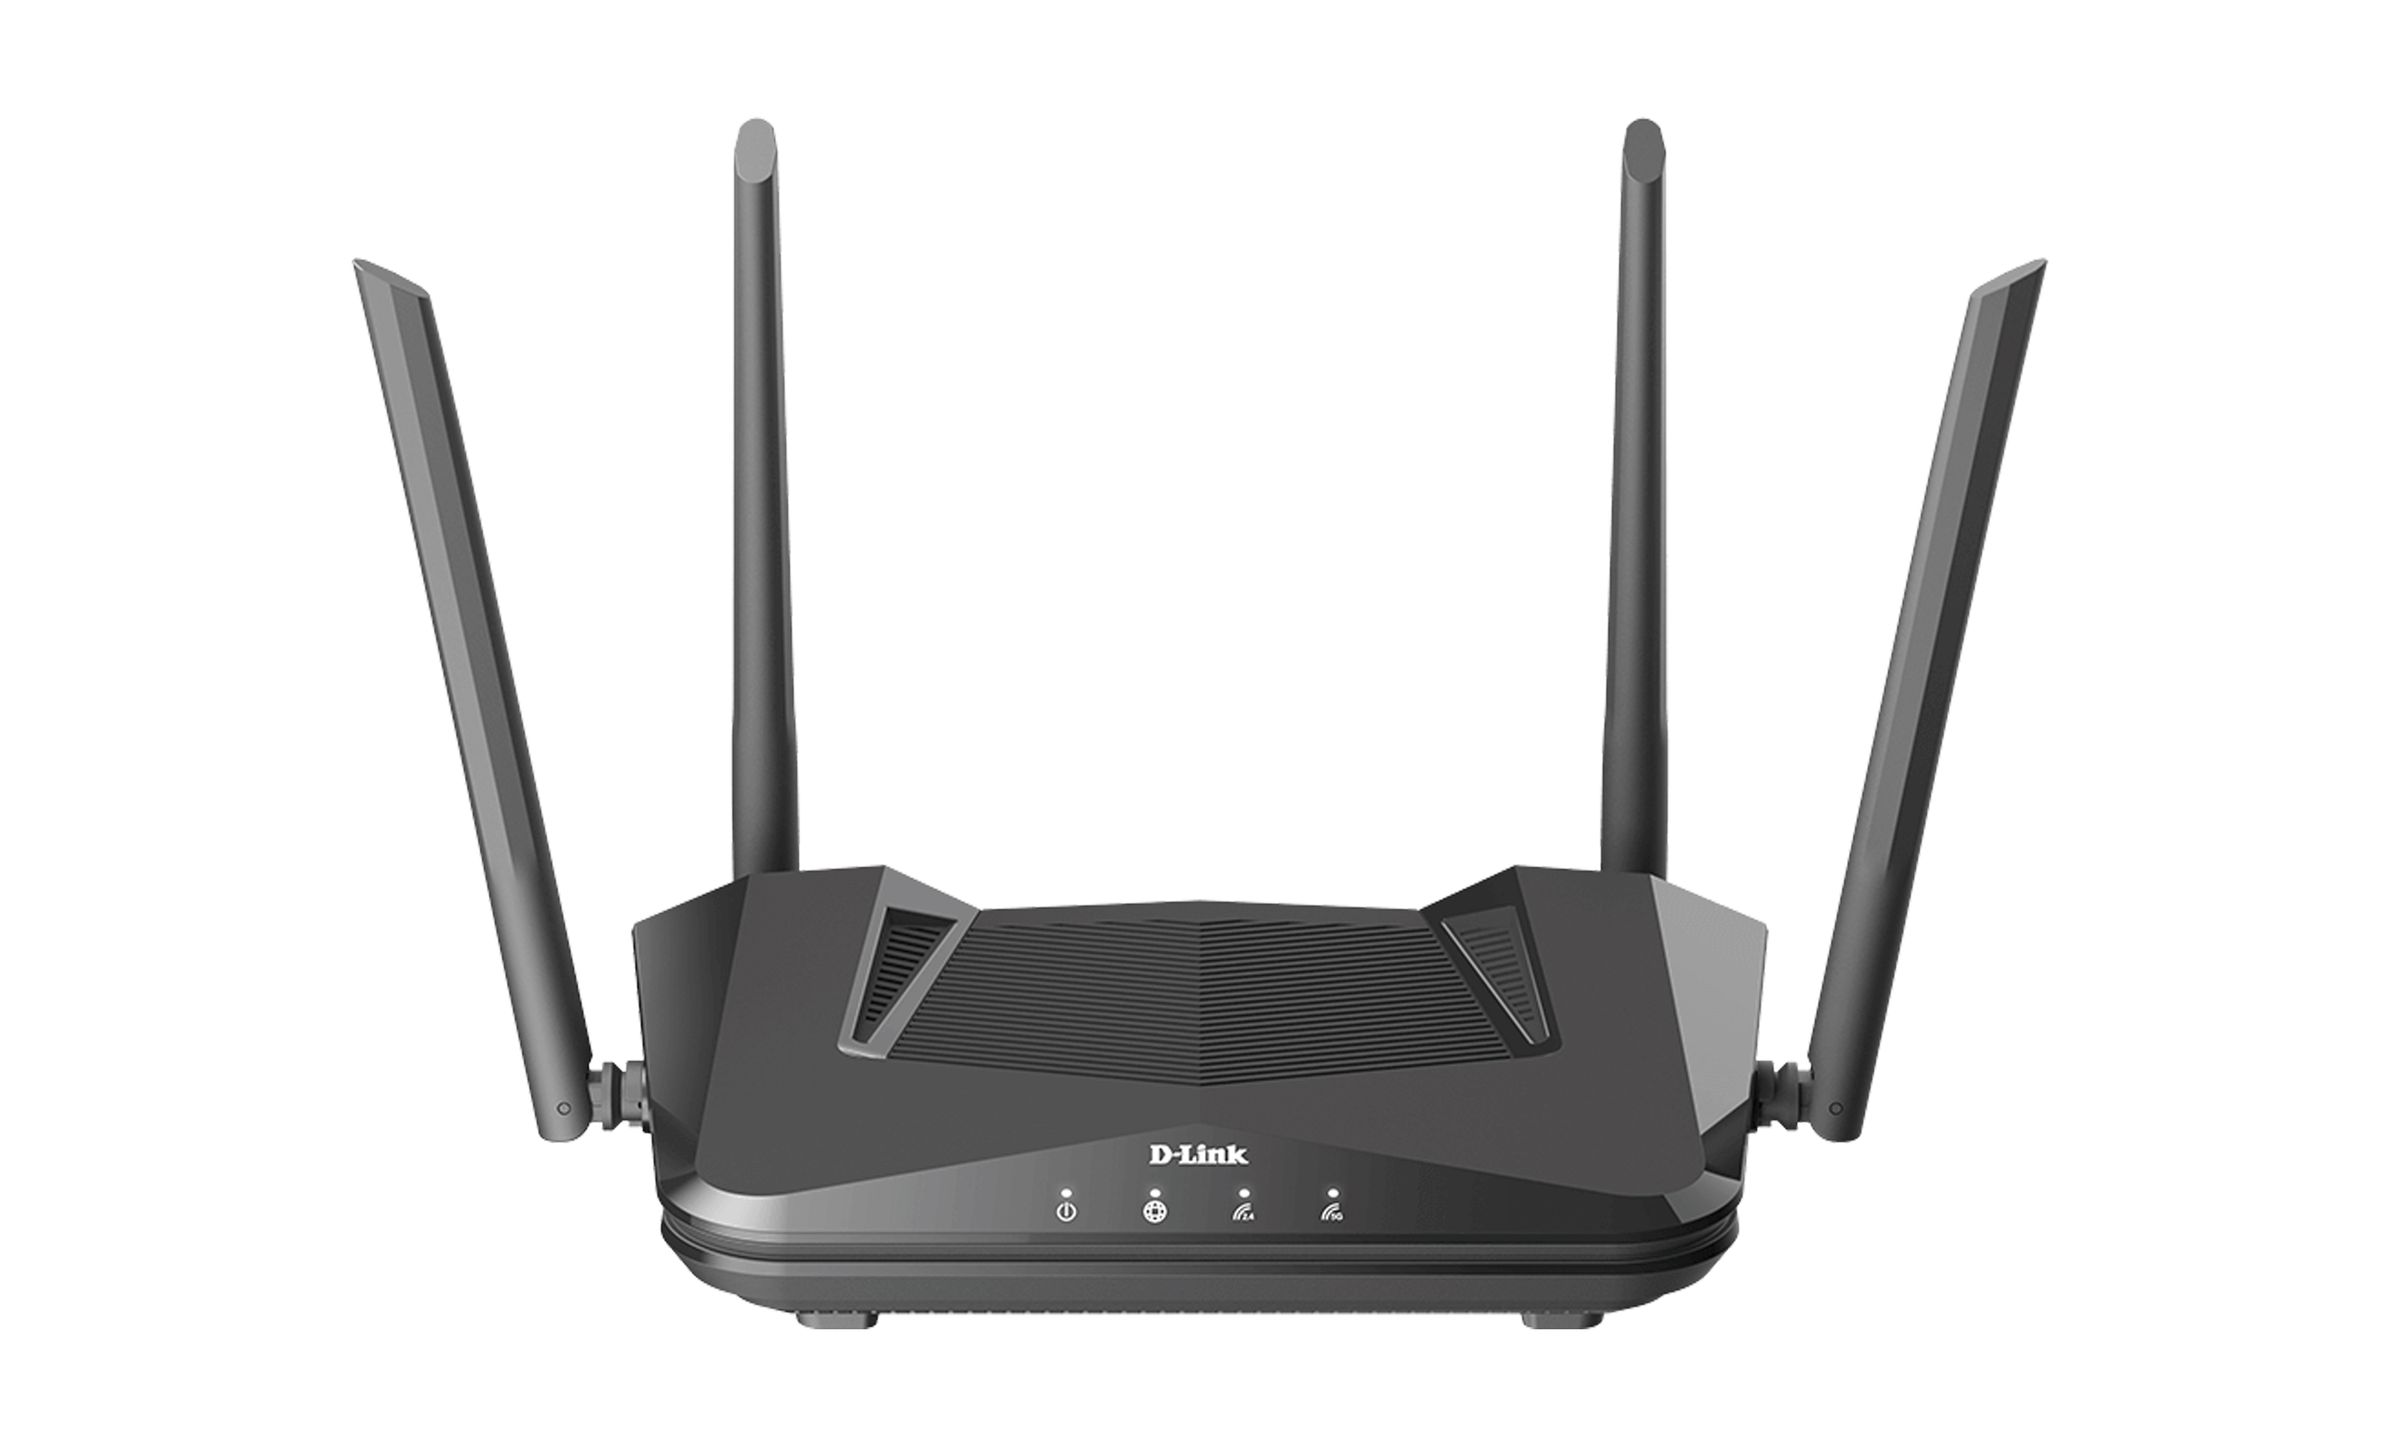 The Smart AX1500 Mesh is the cheapest of the four Wi-Fi 6 routers D-Link announced at CES. Coming out this quarter for $120, the AX1500 promises up to 1.5 Gbps of throughput from dual-band antennas, and it can mesh with other routers in the company’s lineup.